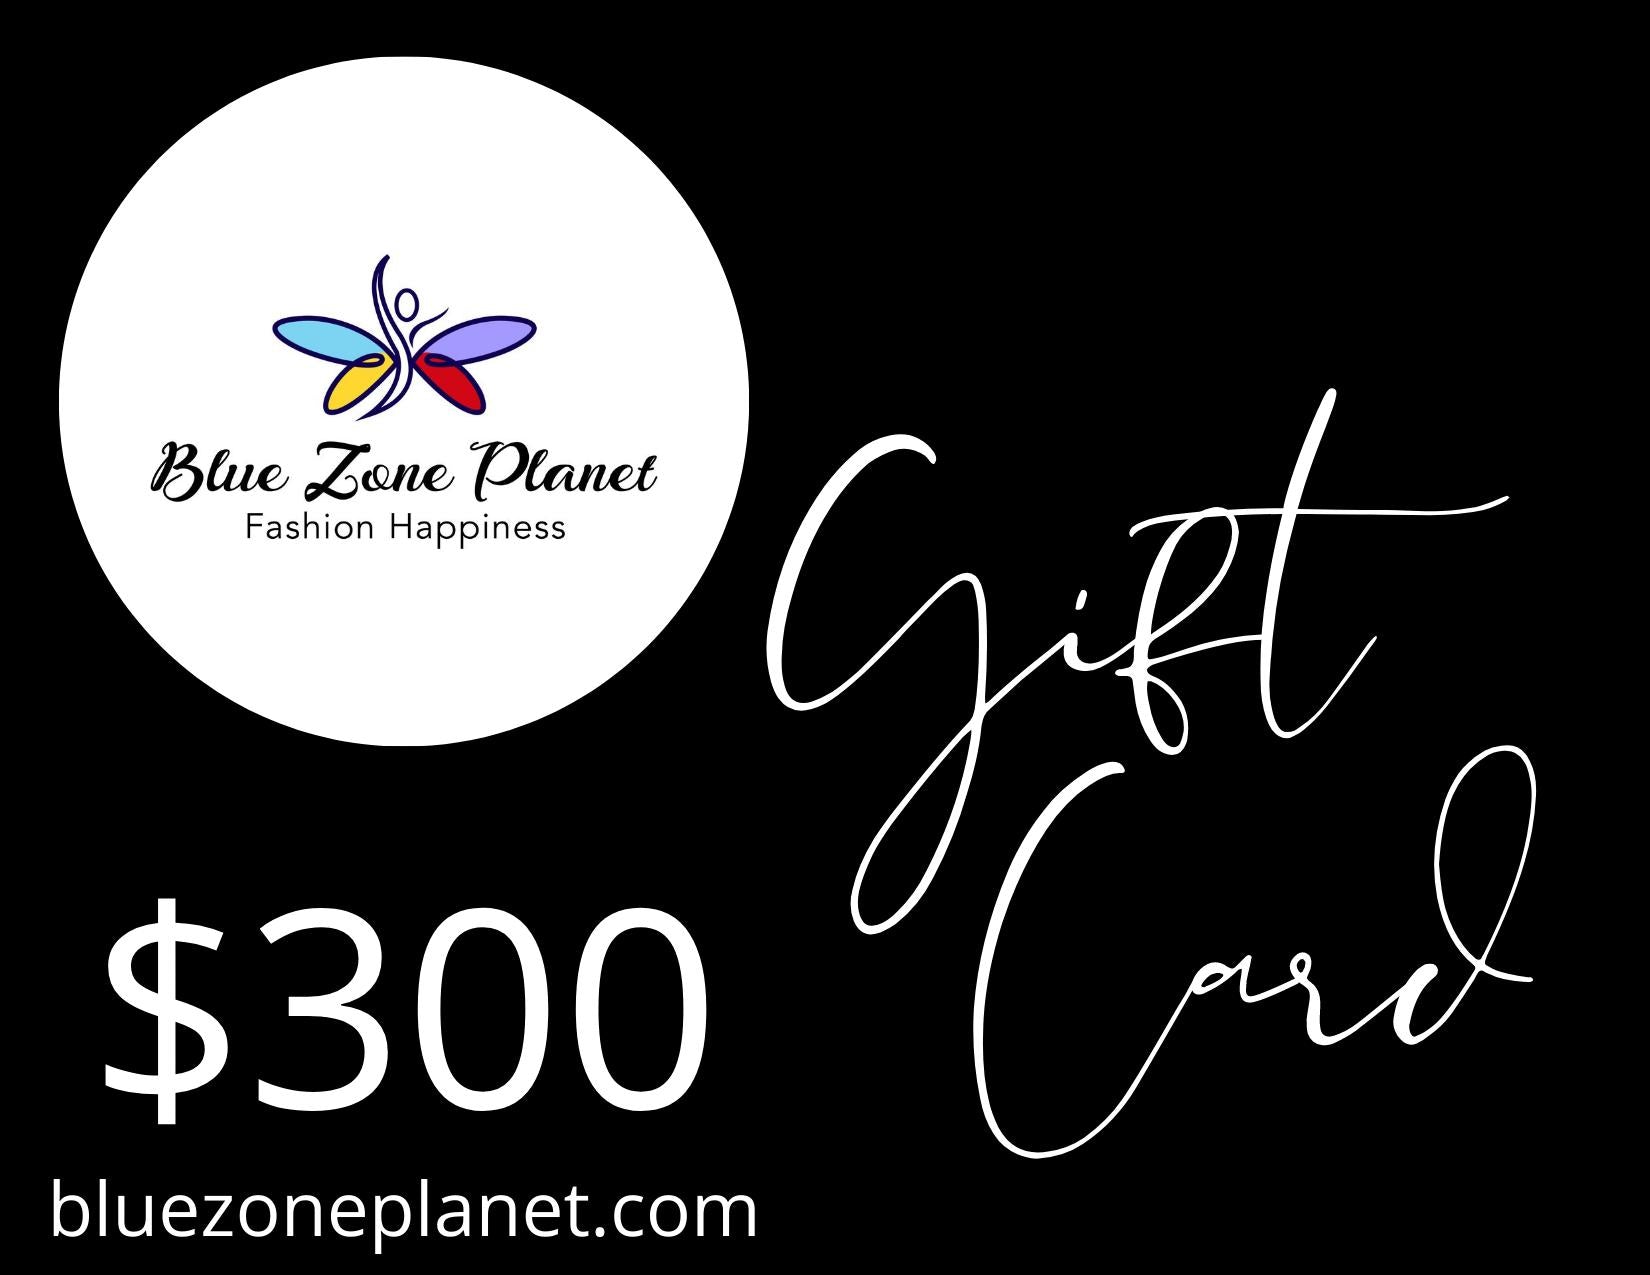 Blue Zone Planet Gift Card Blue Zone Planet